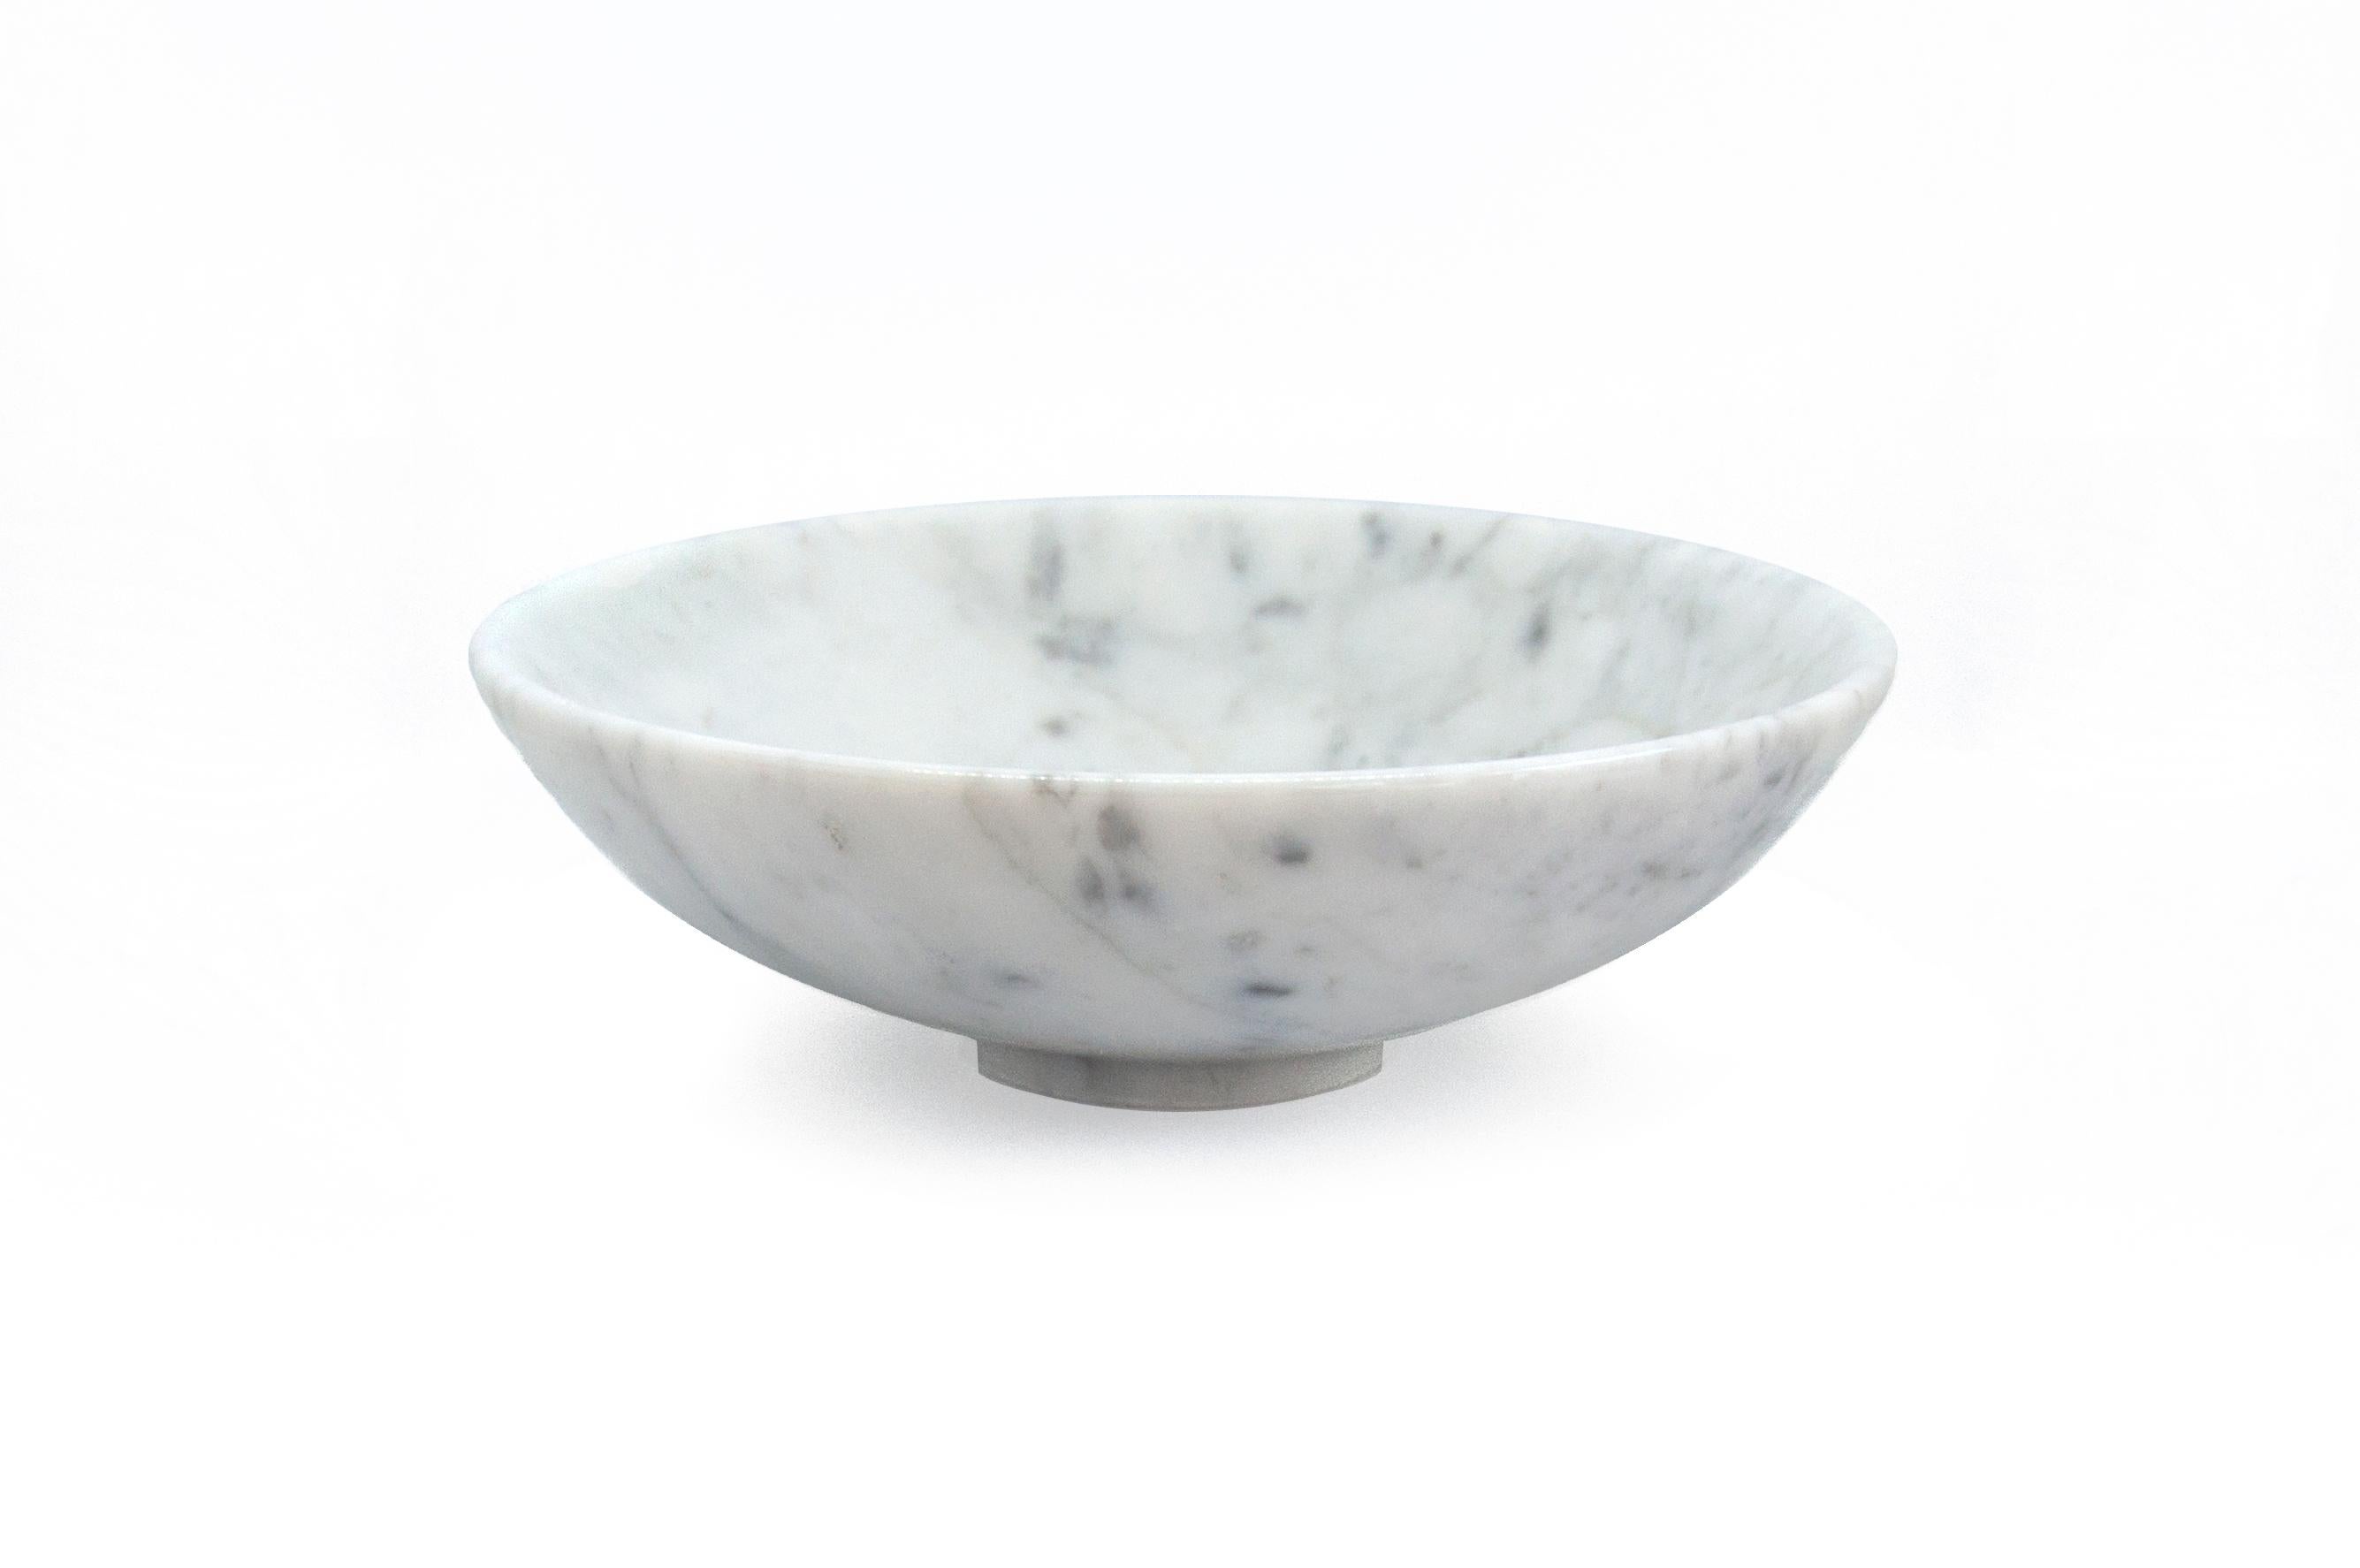 Fruit bowl in white Carrara marble ideal for fruit and to present food. Each piece is in a way unique (every marble block is different in veins and shades) and handmade by Italian artisans specialized over generations in processing marble. Slight